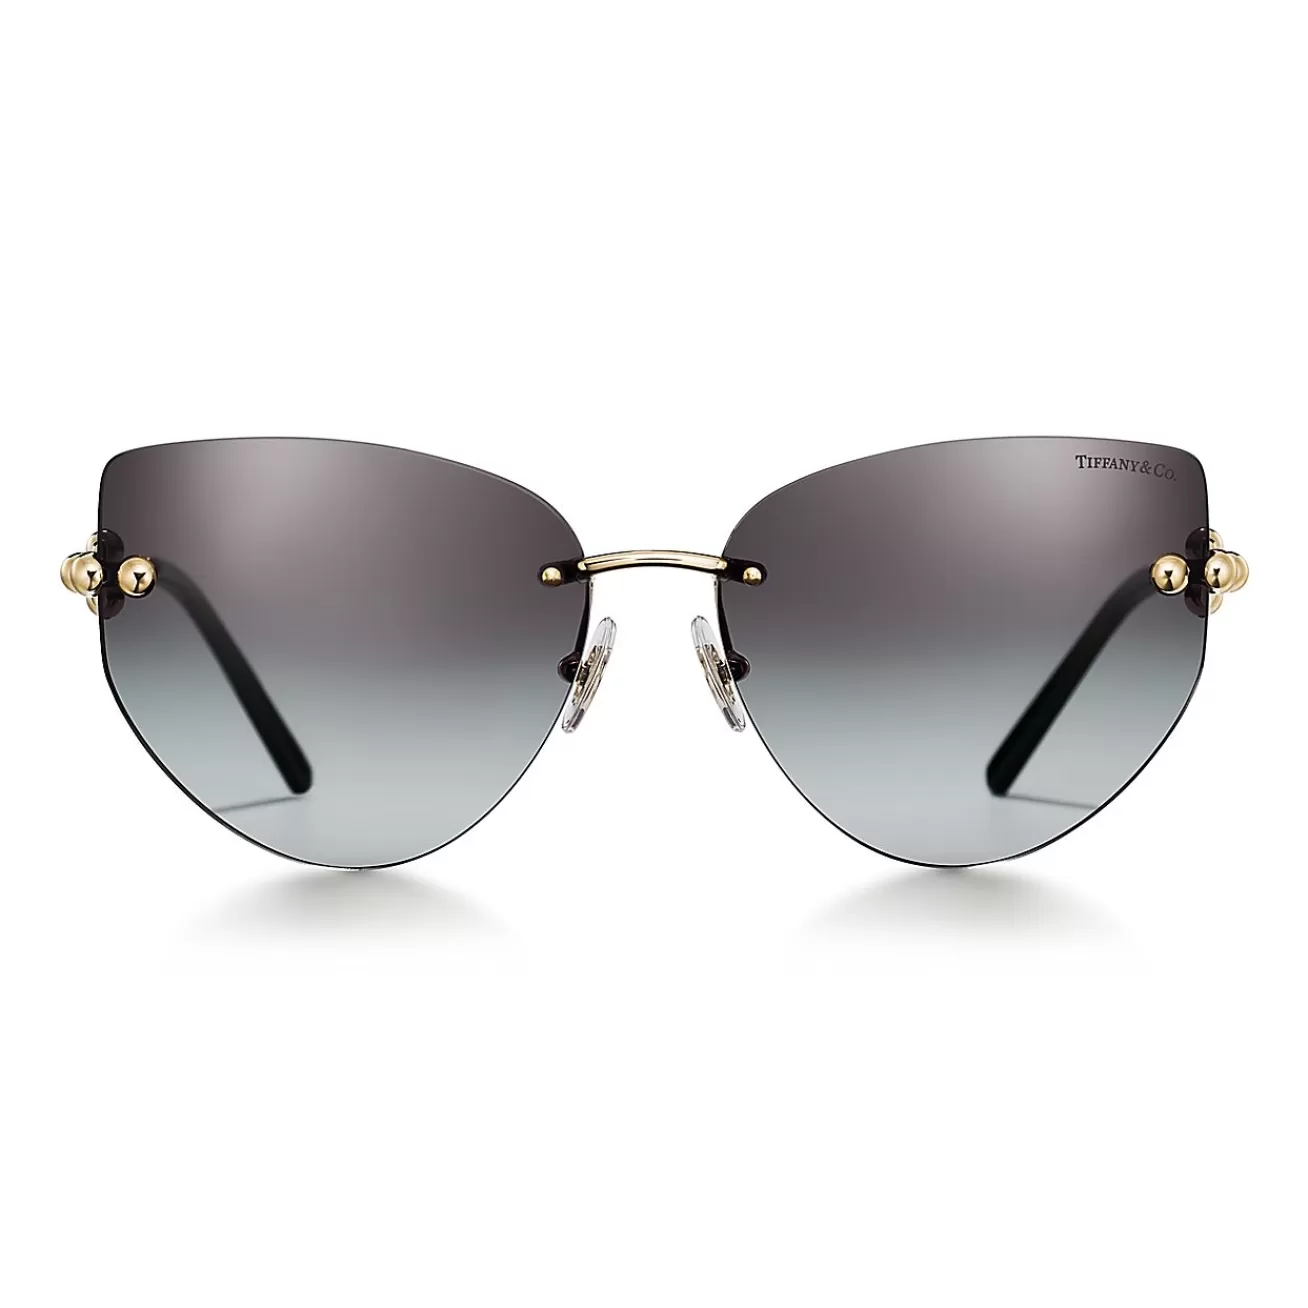 Tiffany & Co. Tiffany HardWear Sunglasses in Pale Gold-colored Metal with Gray Gradient Lenses | ^Women Tiffany HardWear | Sunglasses